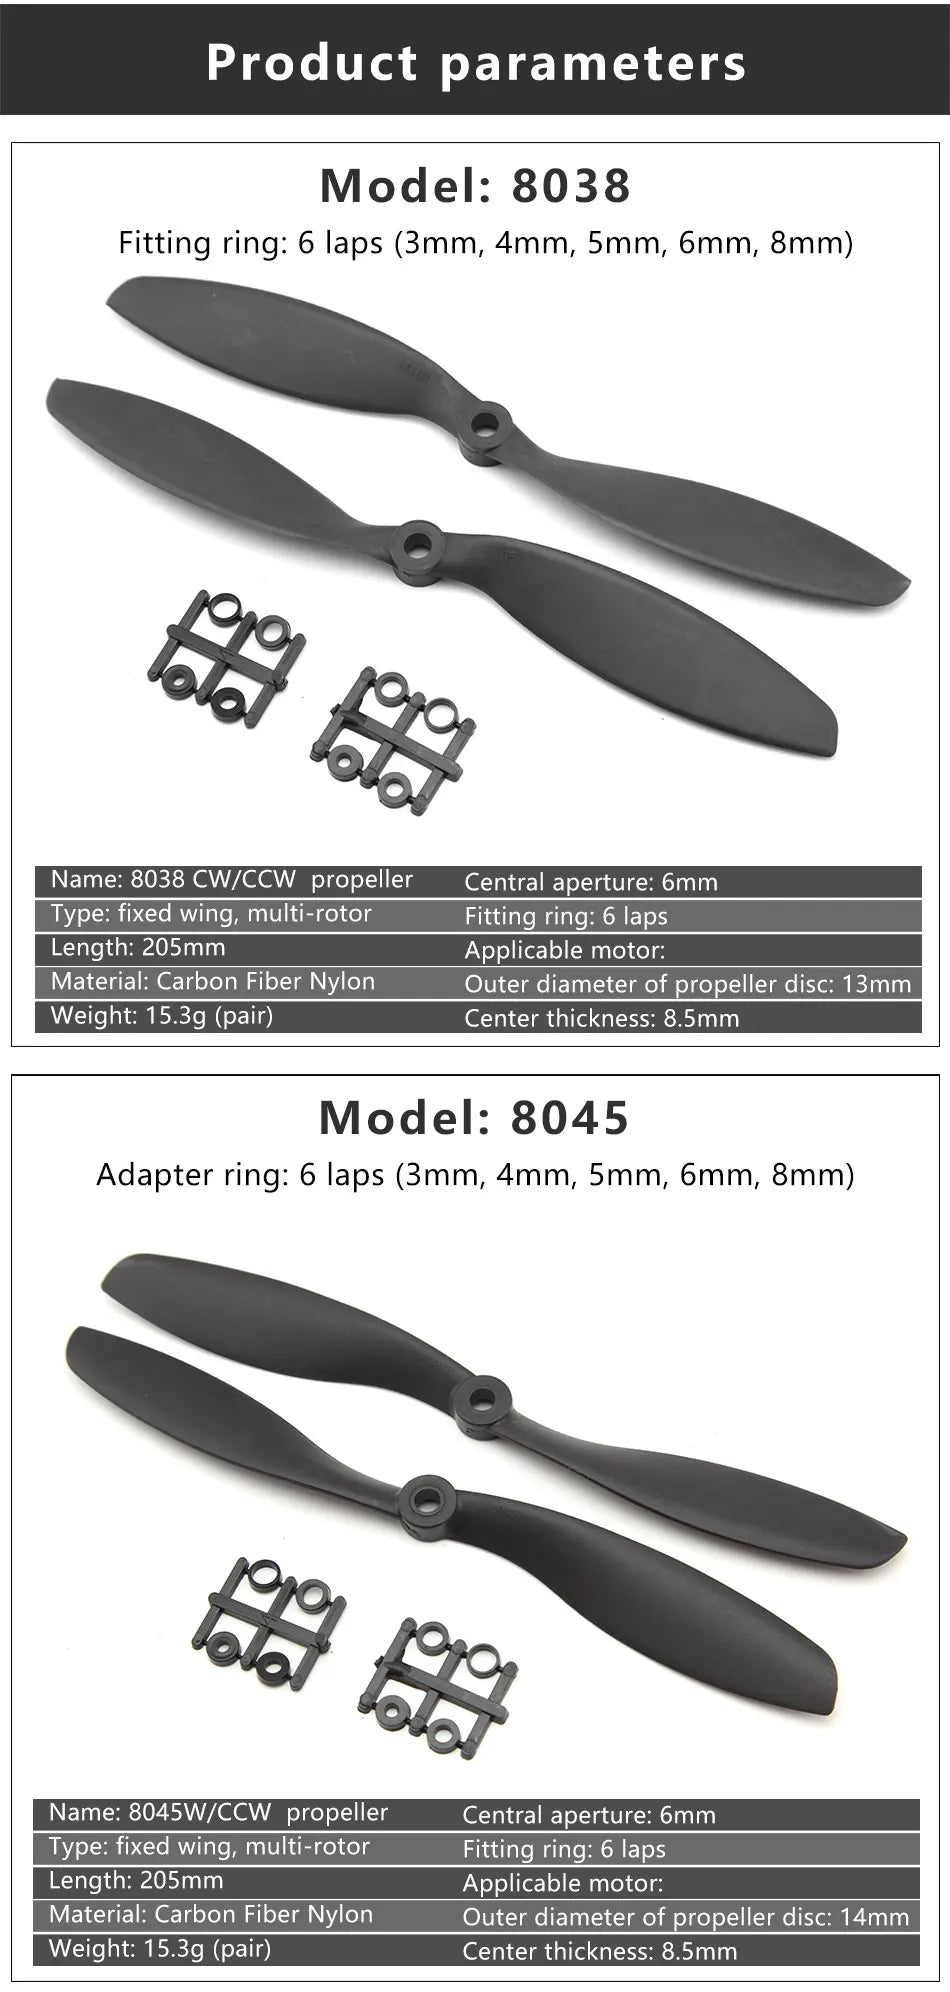 8038 CWICCW propeller Central aperture: 6mm Type: fixed wing;